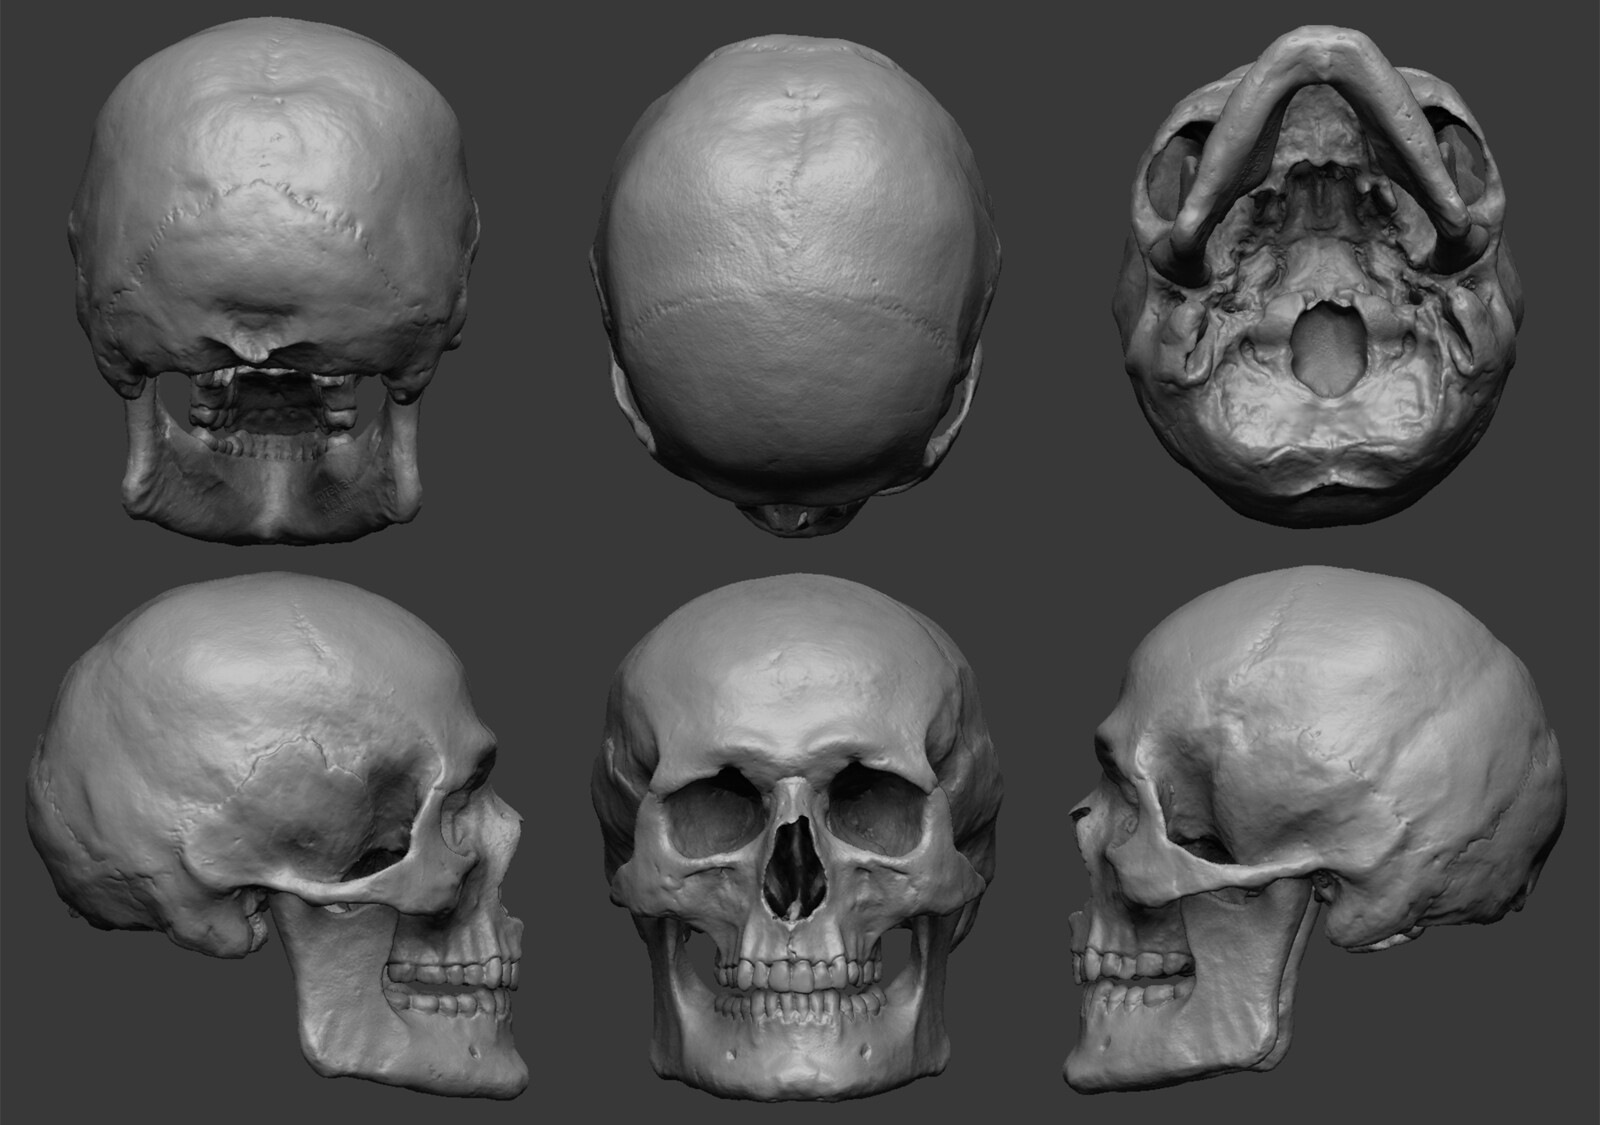 Reference Images provided from a 3D Scan